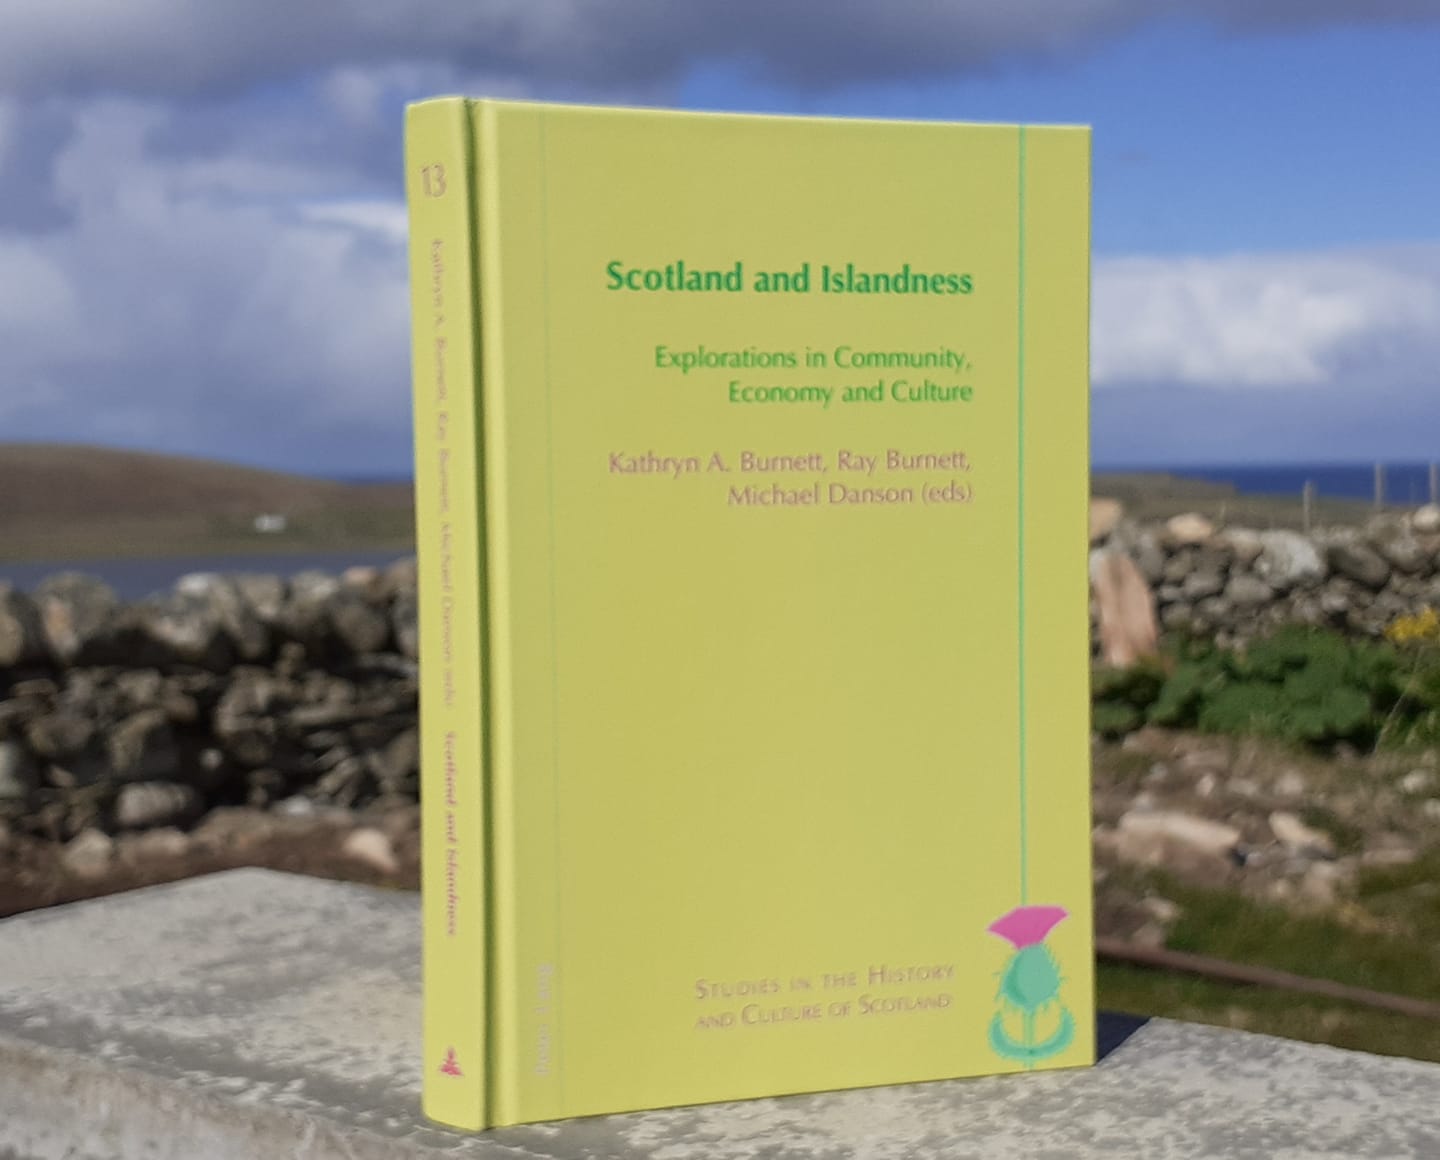 Dr Andrew Jennings chapter in new book 'Scotland and Islandness: Explorations in Community, Economy and Culture' 